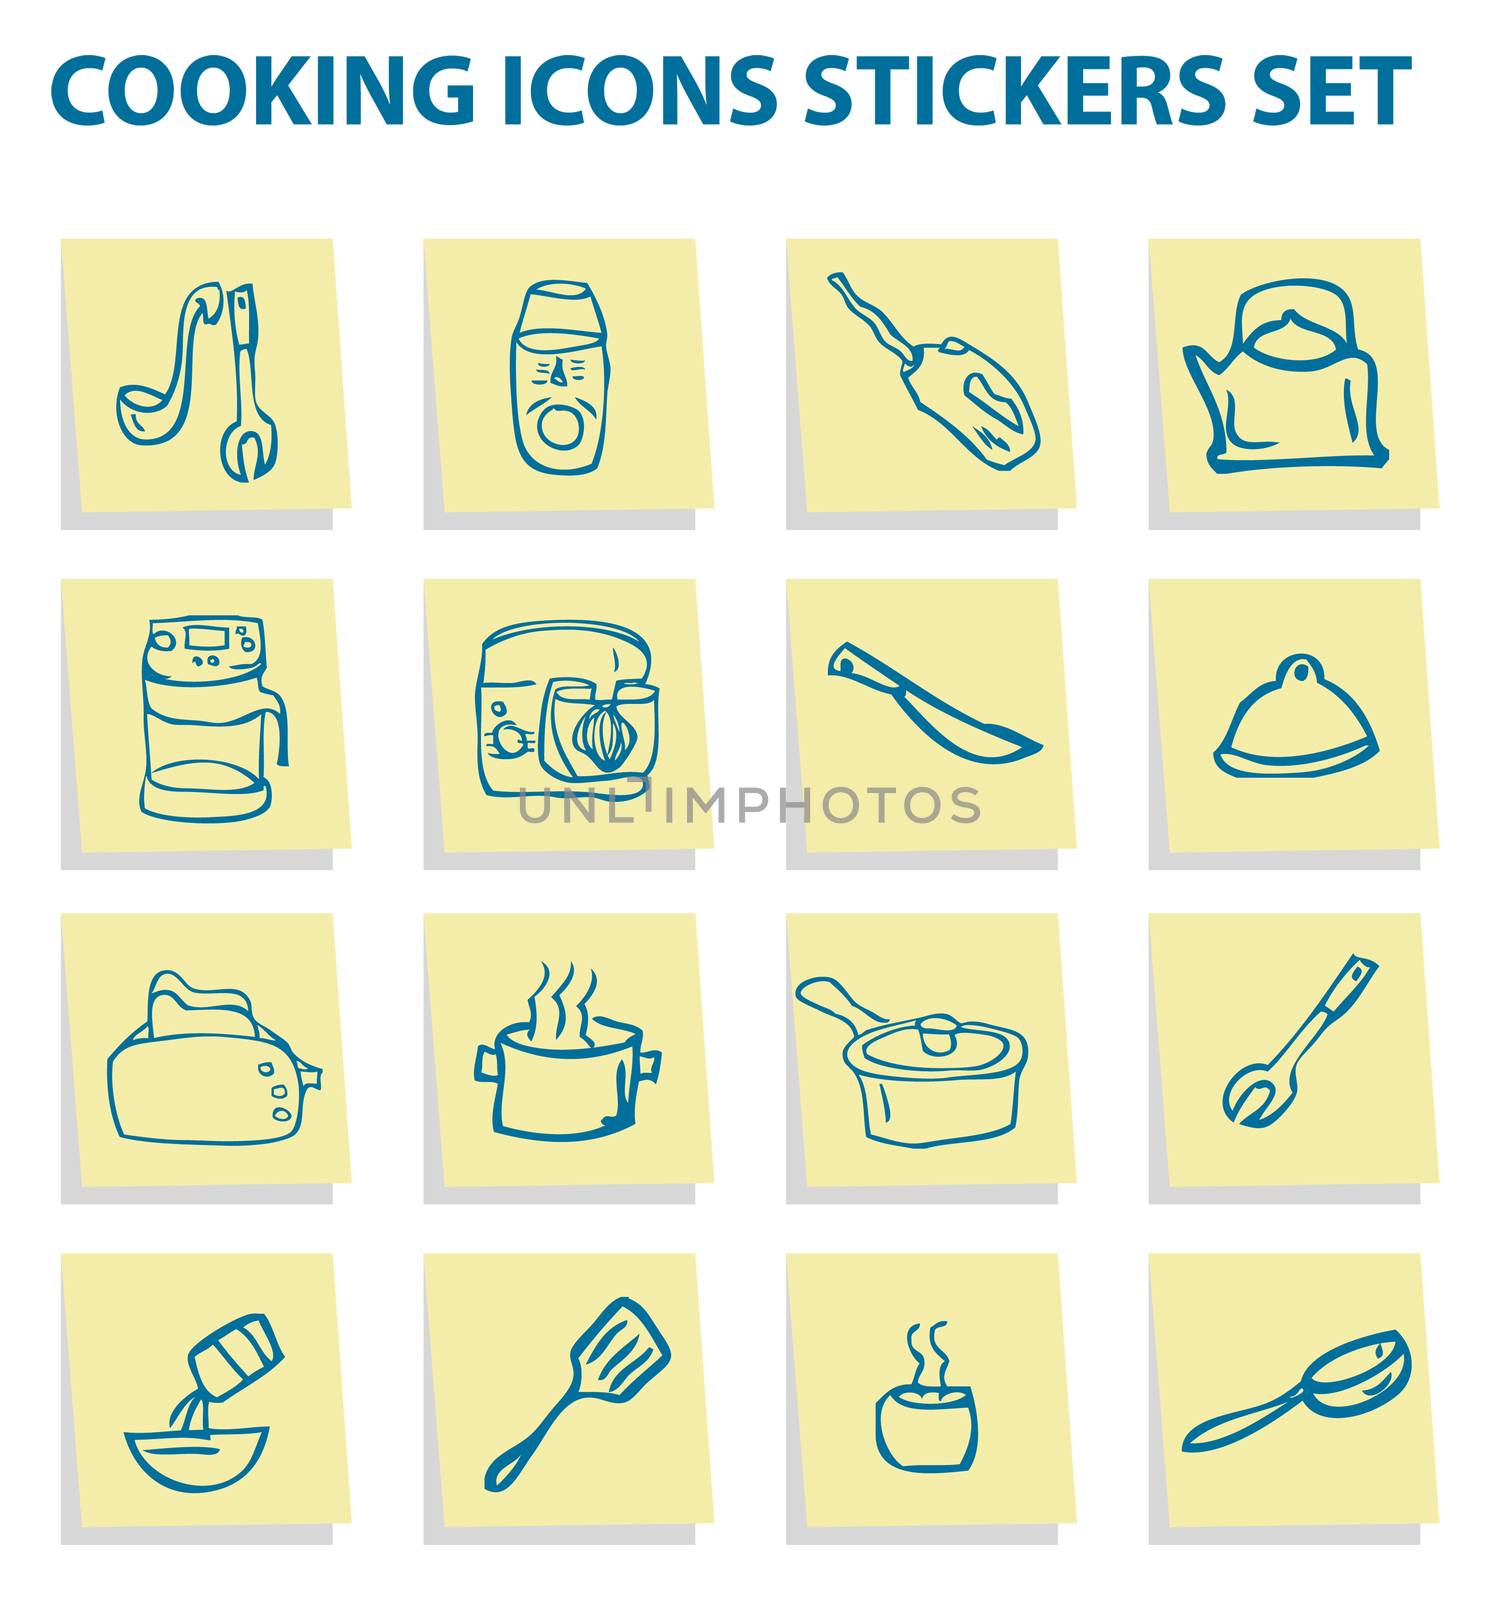 Cooking icons stickers set, kitchen elements 3